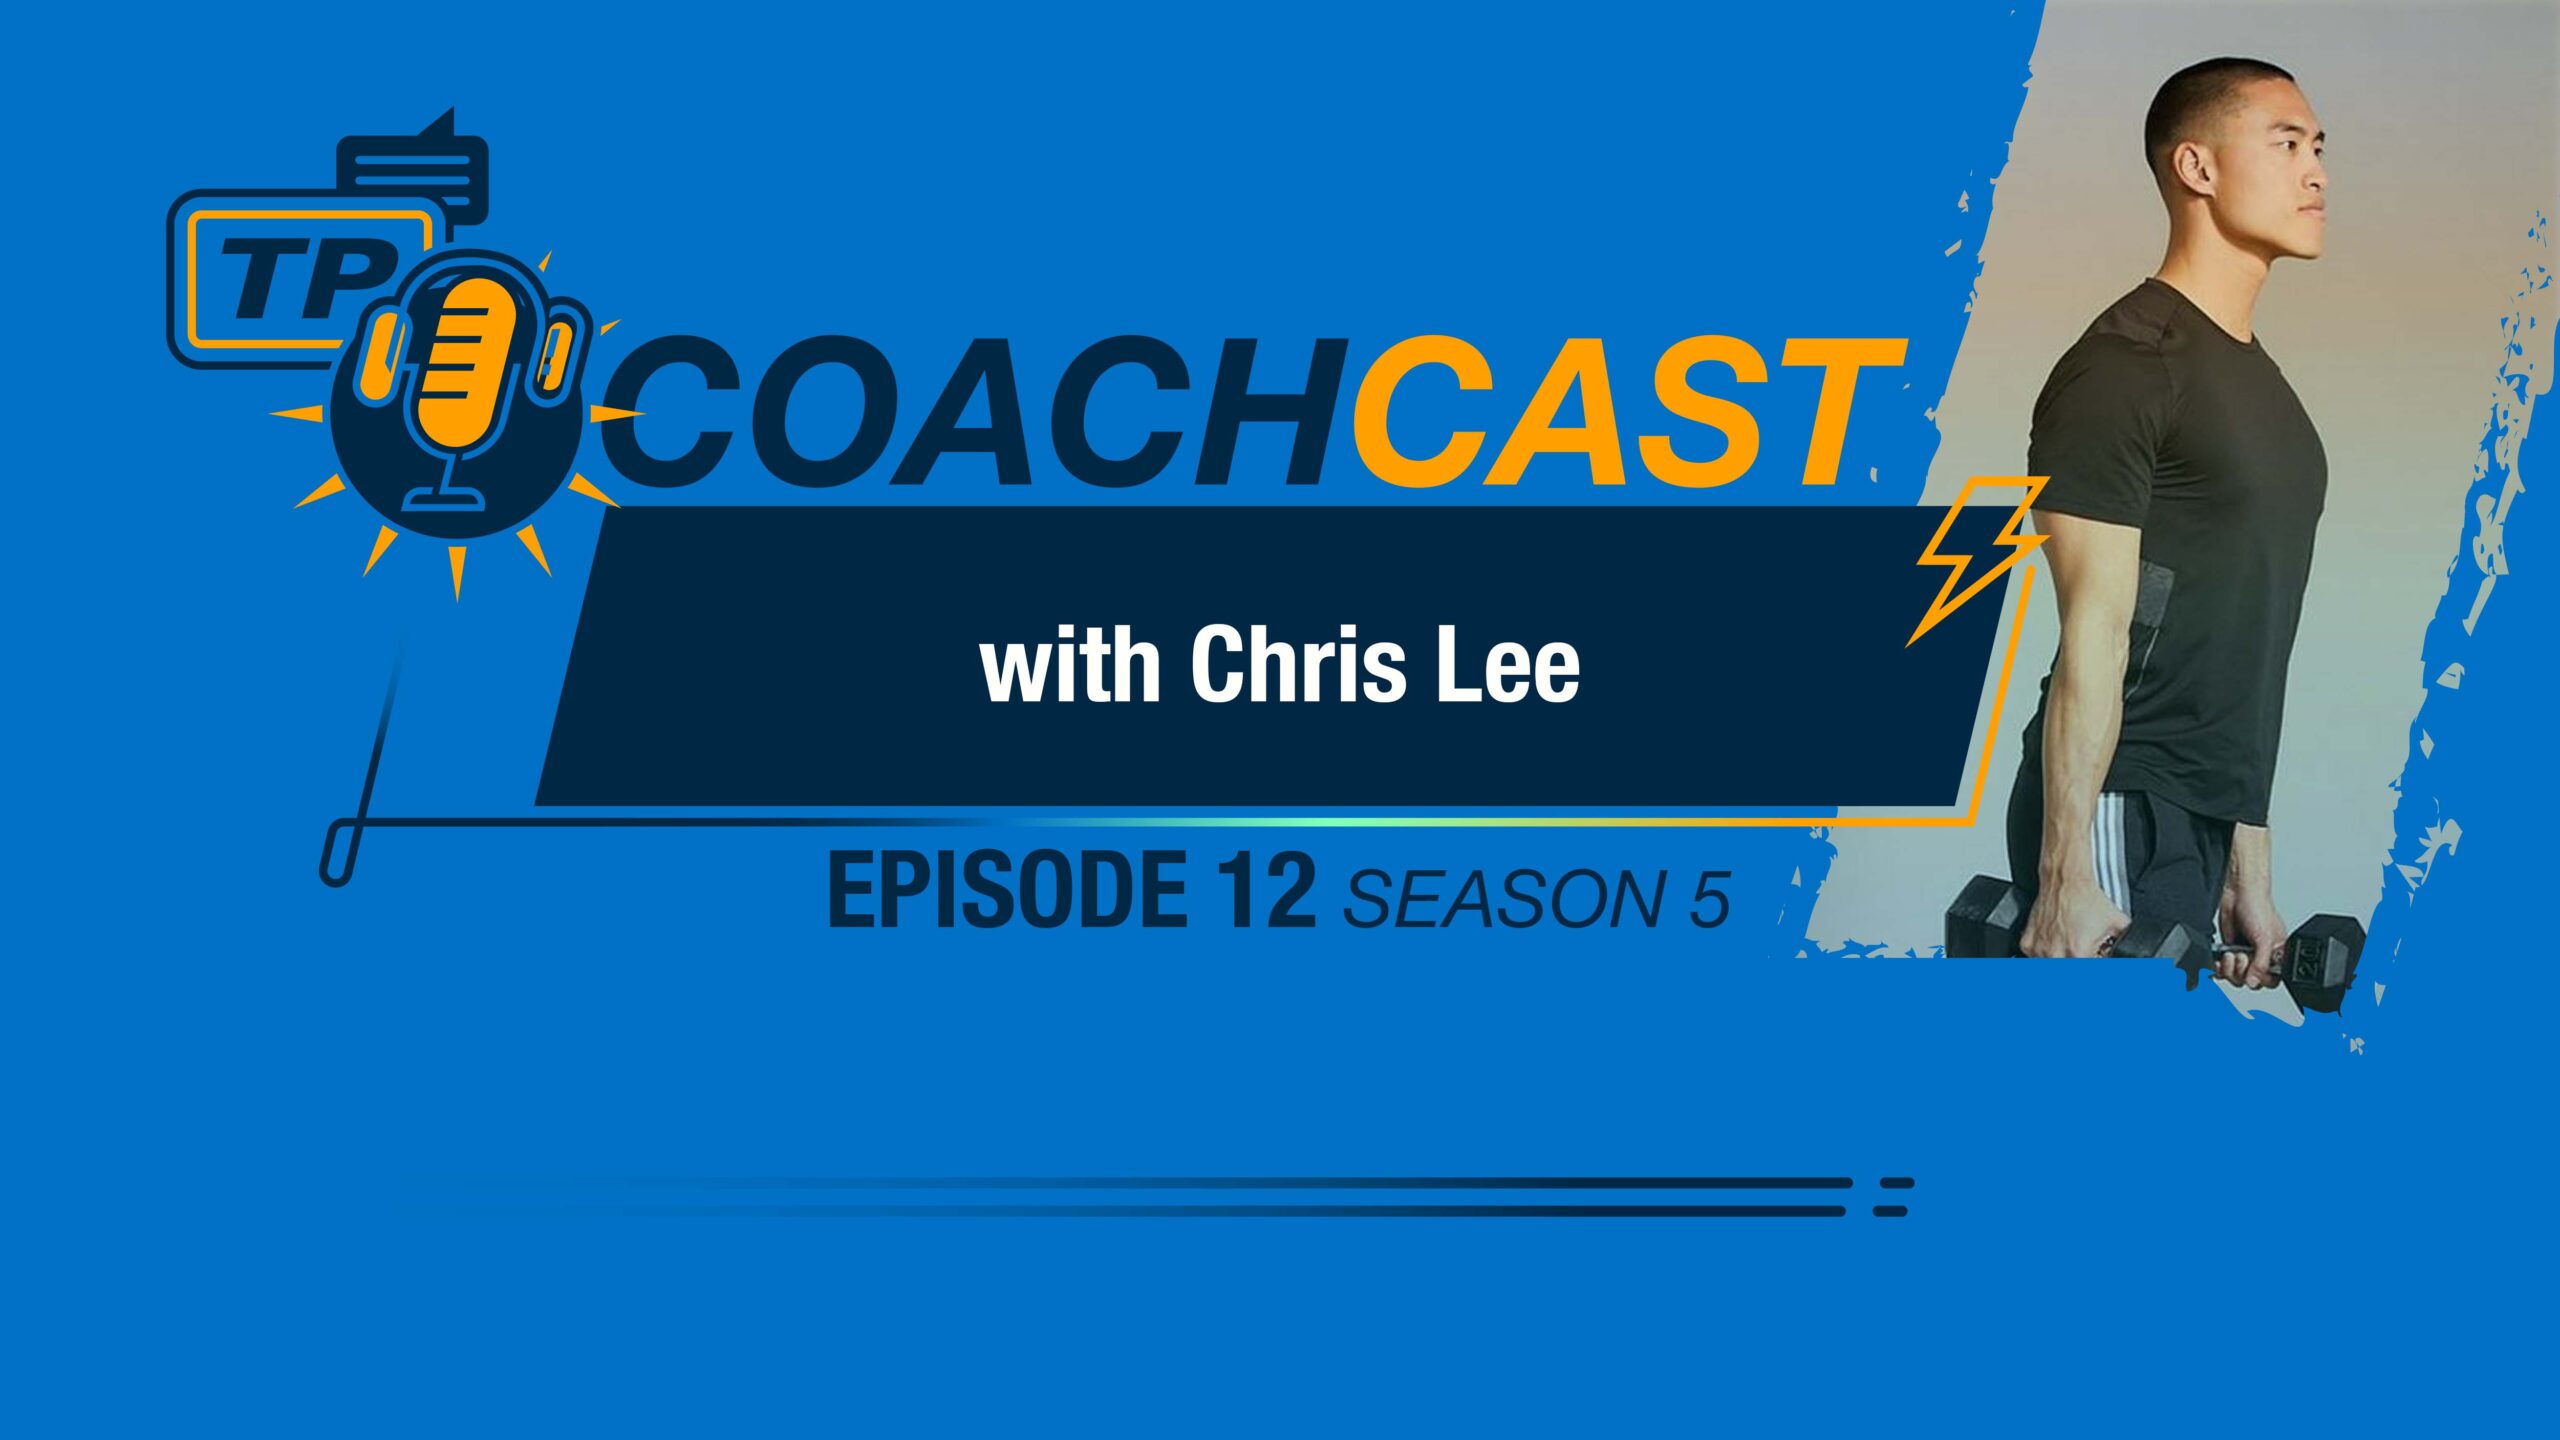 Coachcast Title Card With Image Of Chris Lee